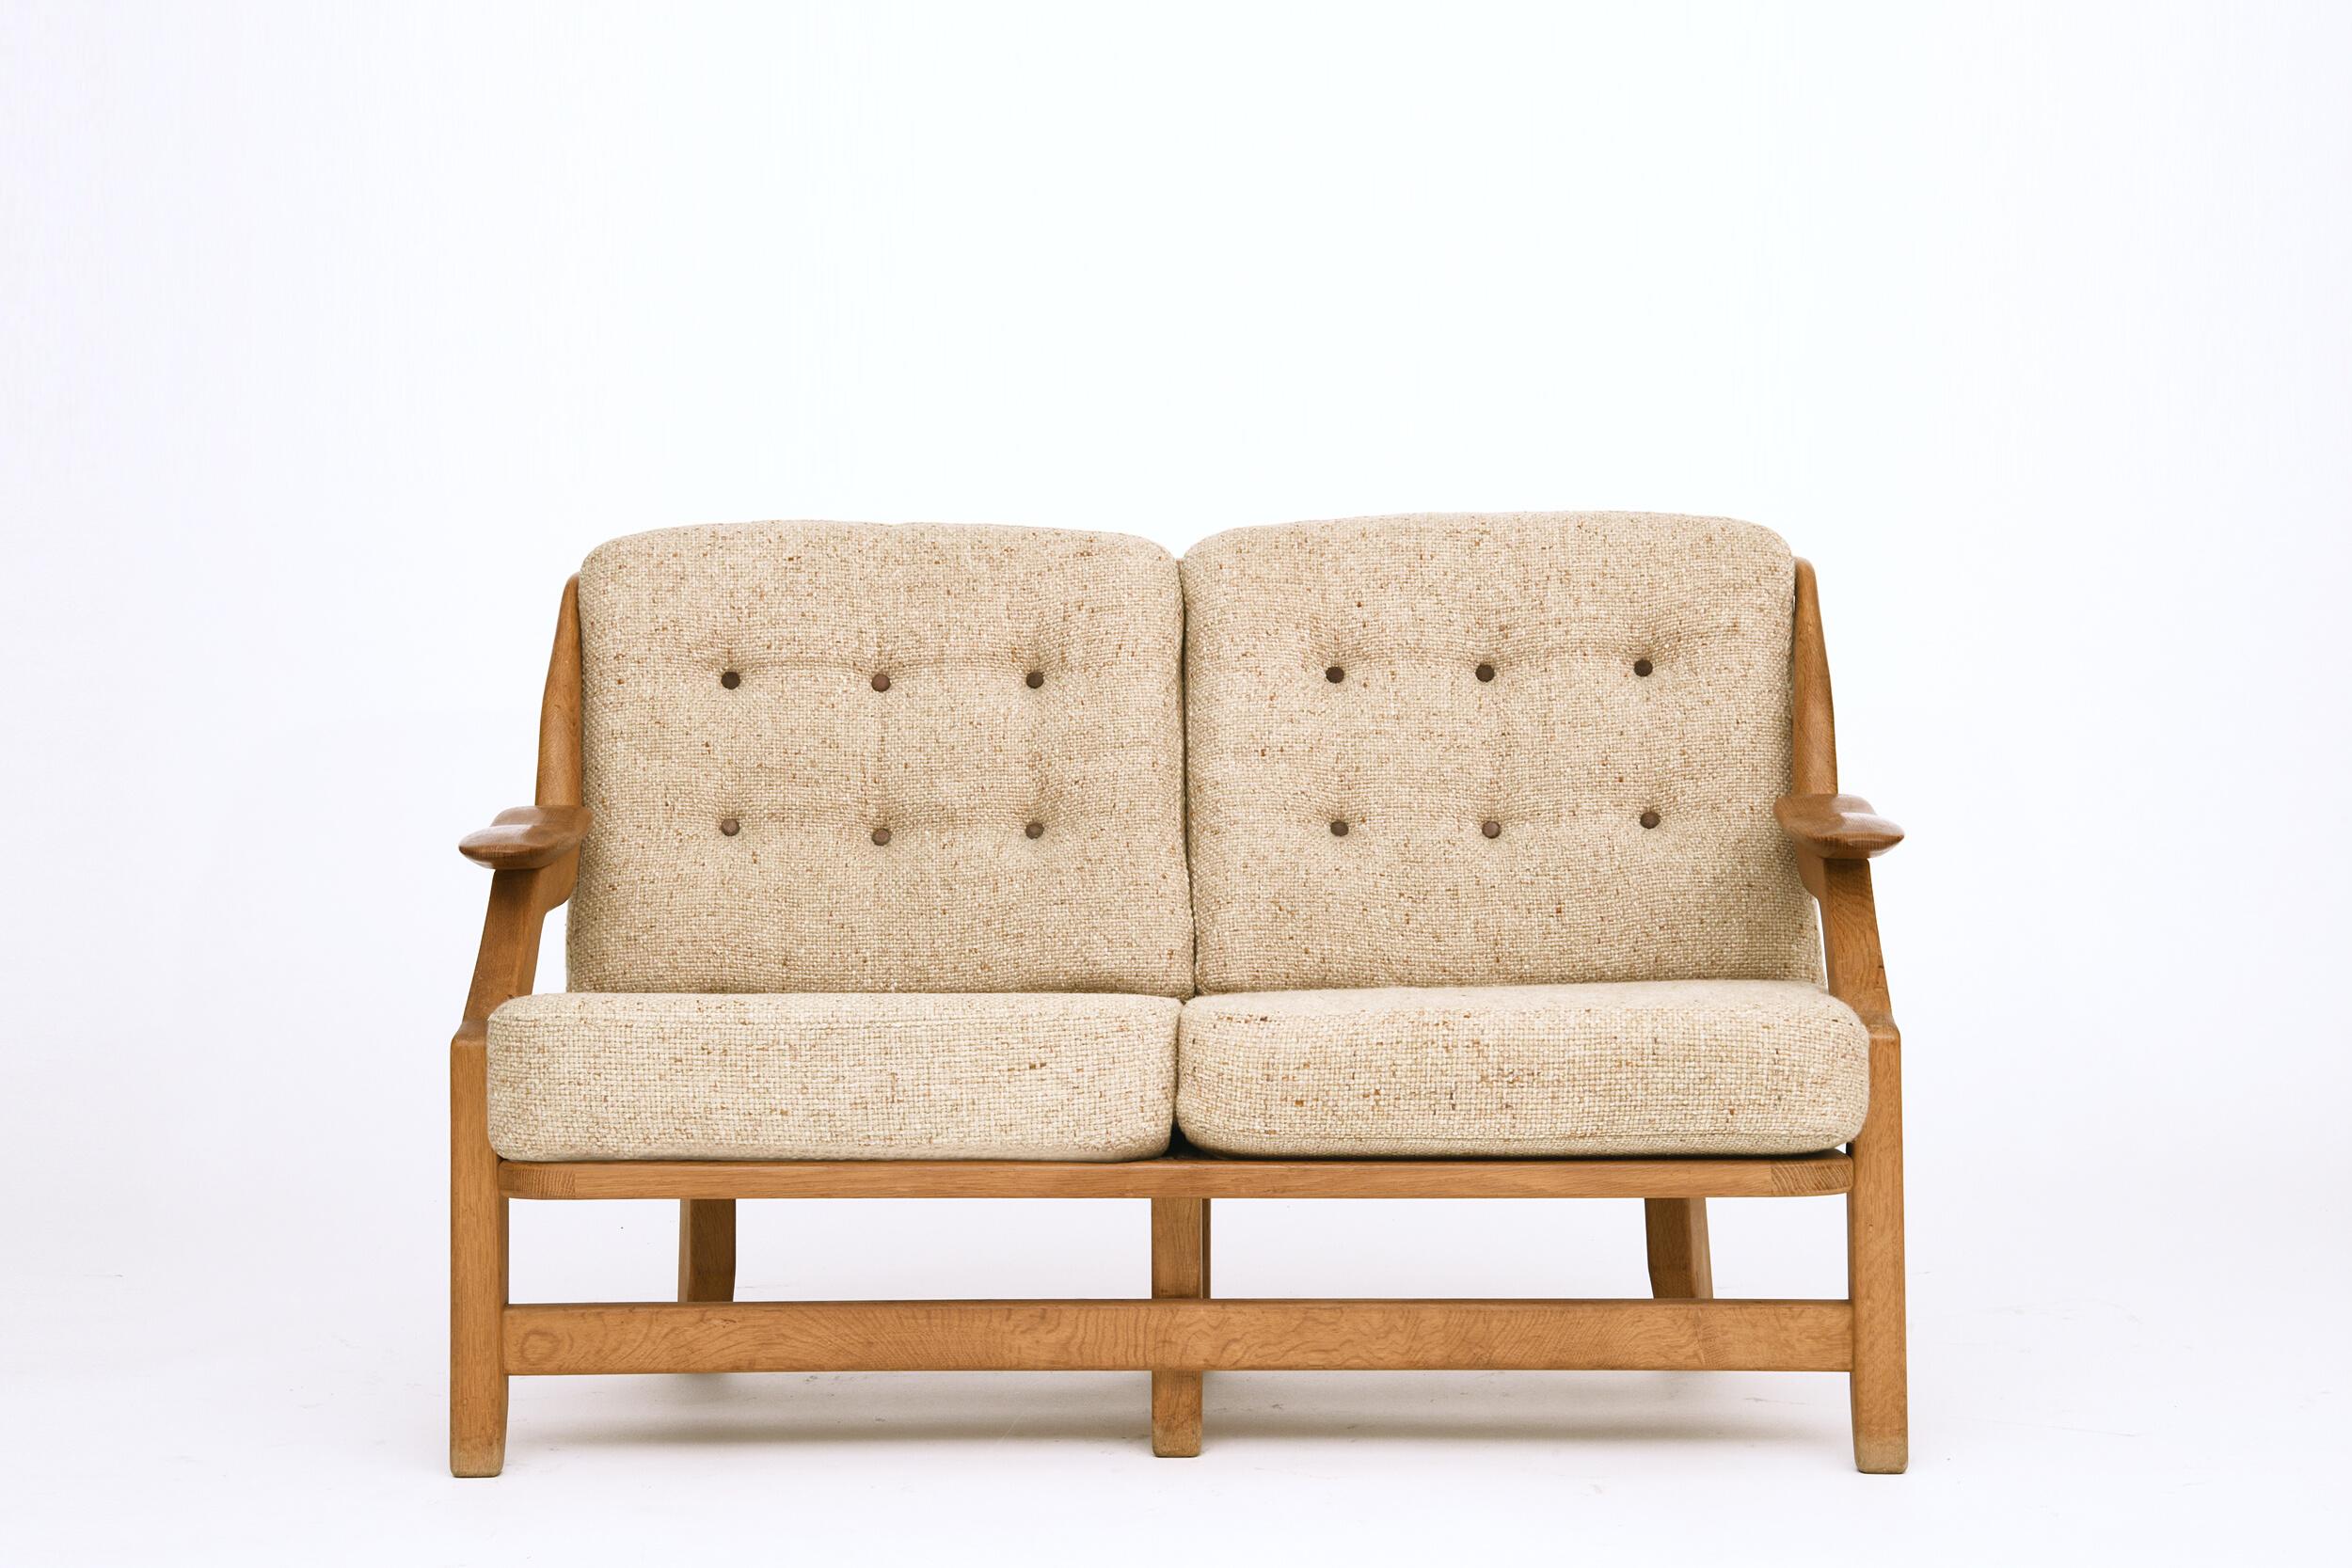 This piece is a two-seat upholstered sofa by Guillerme et Chambron made circa 1950 and it is in great condition. 
Measures: Seat: 16.25 H x 48 W x 22.5 D inches 
Armrest: 22.5-23 H inches.